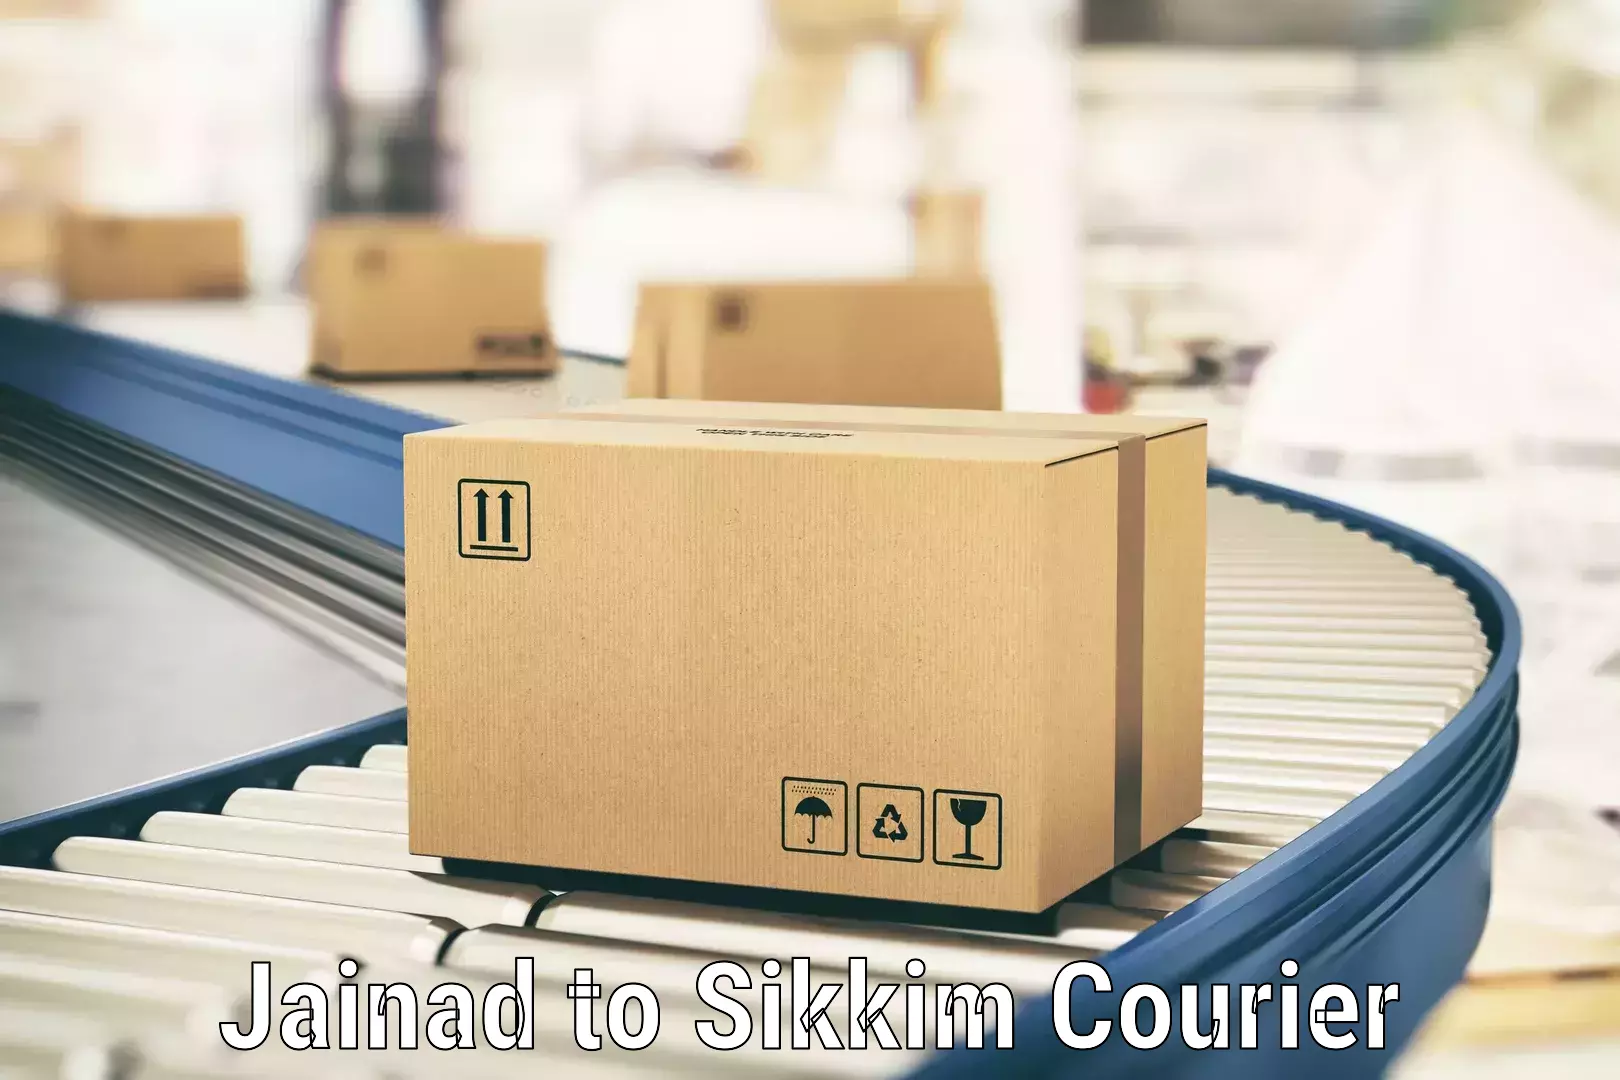 Smart parcel delivery Jainad to Sikkim